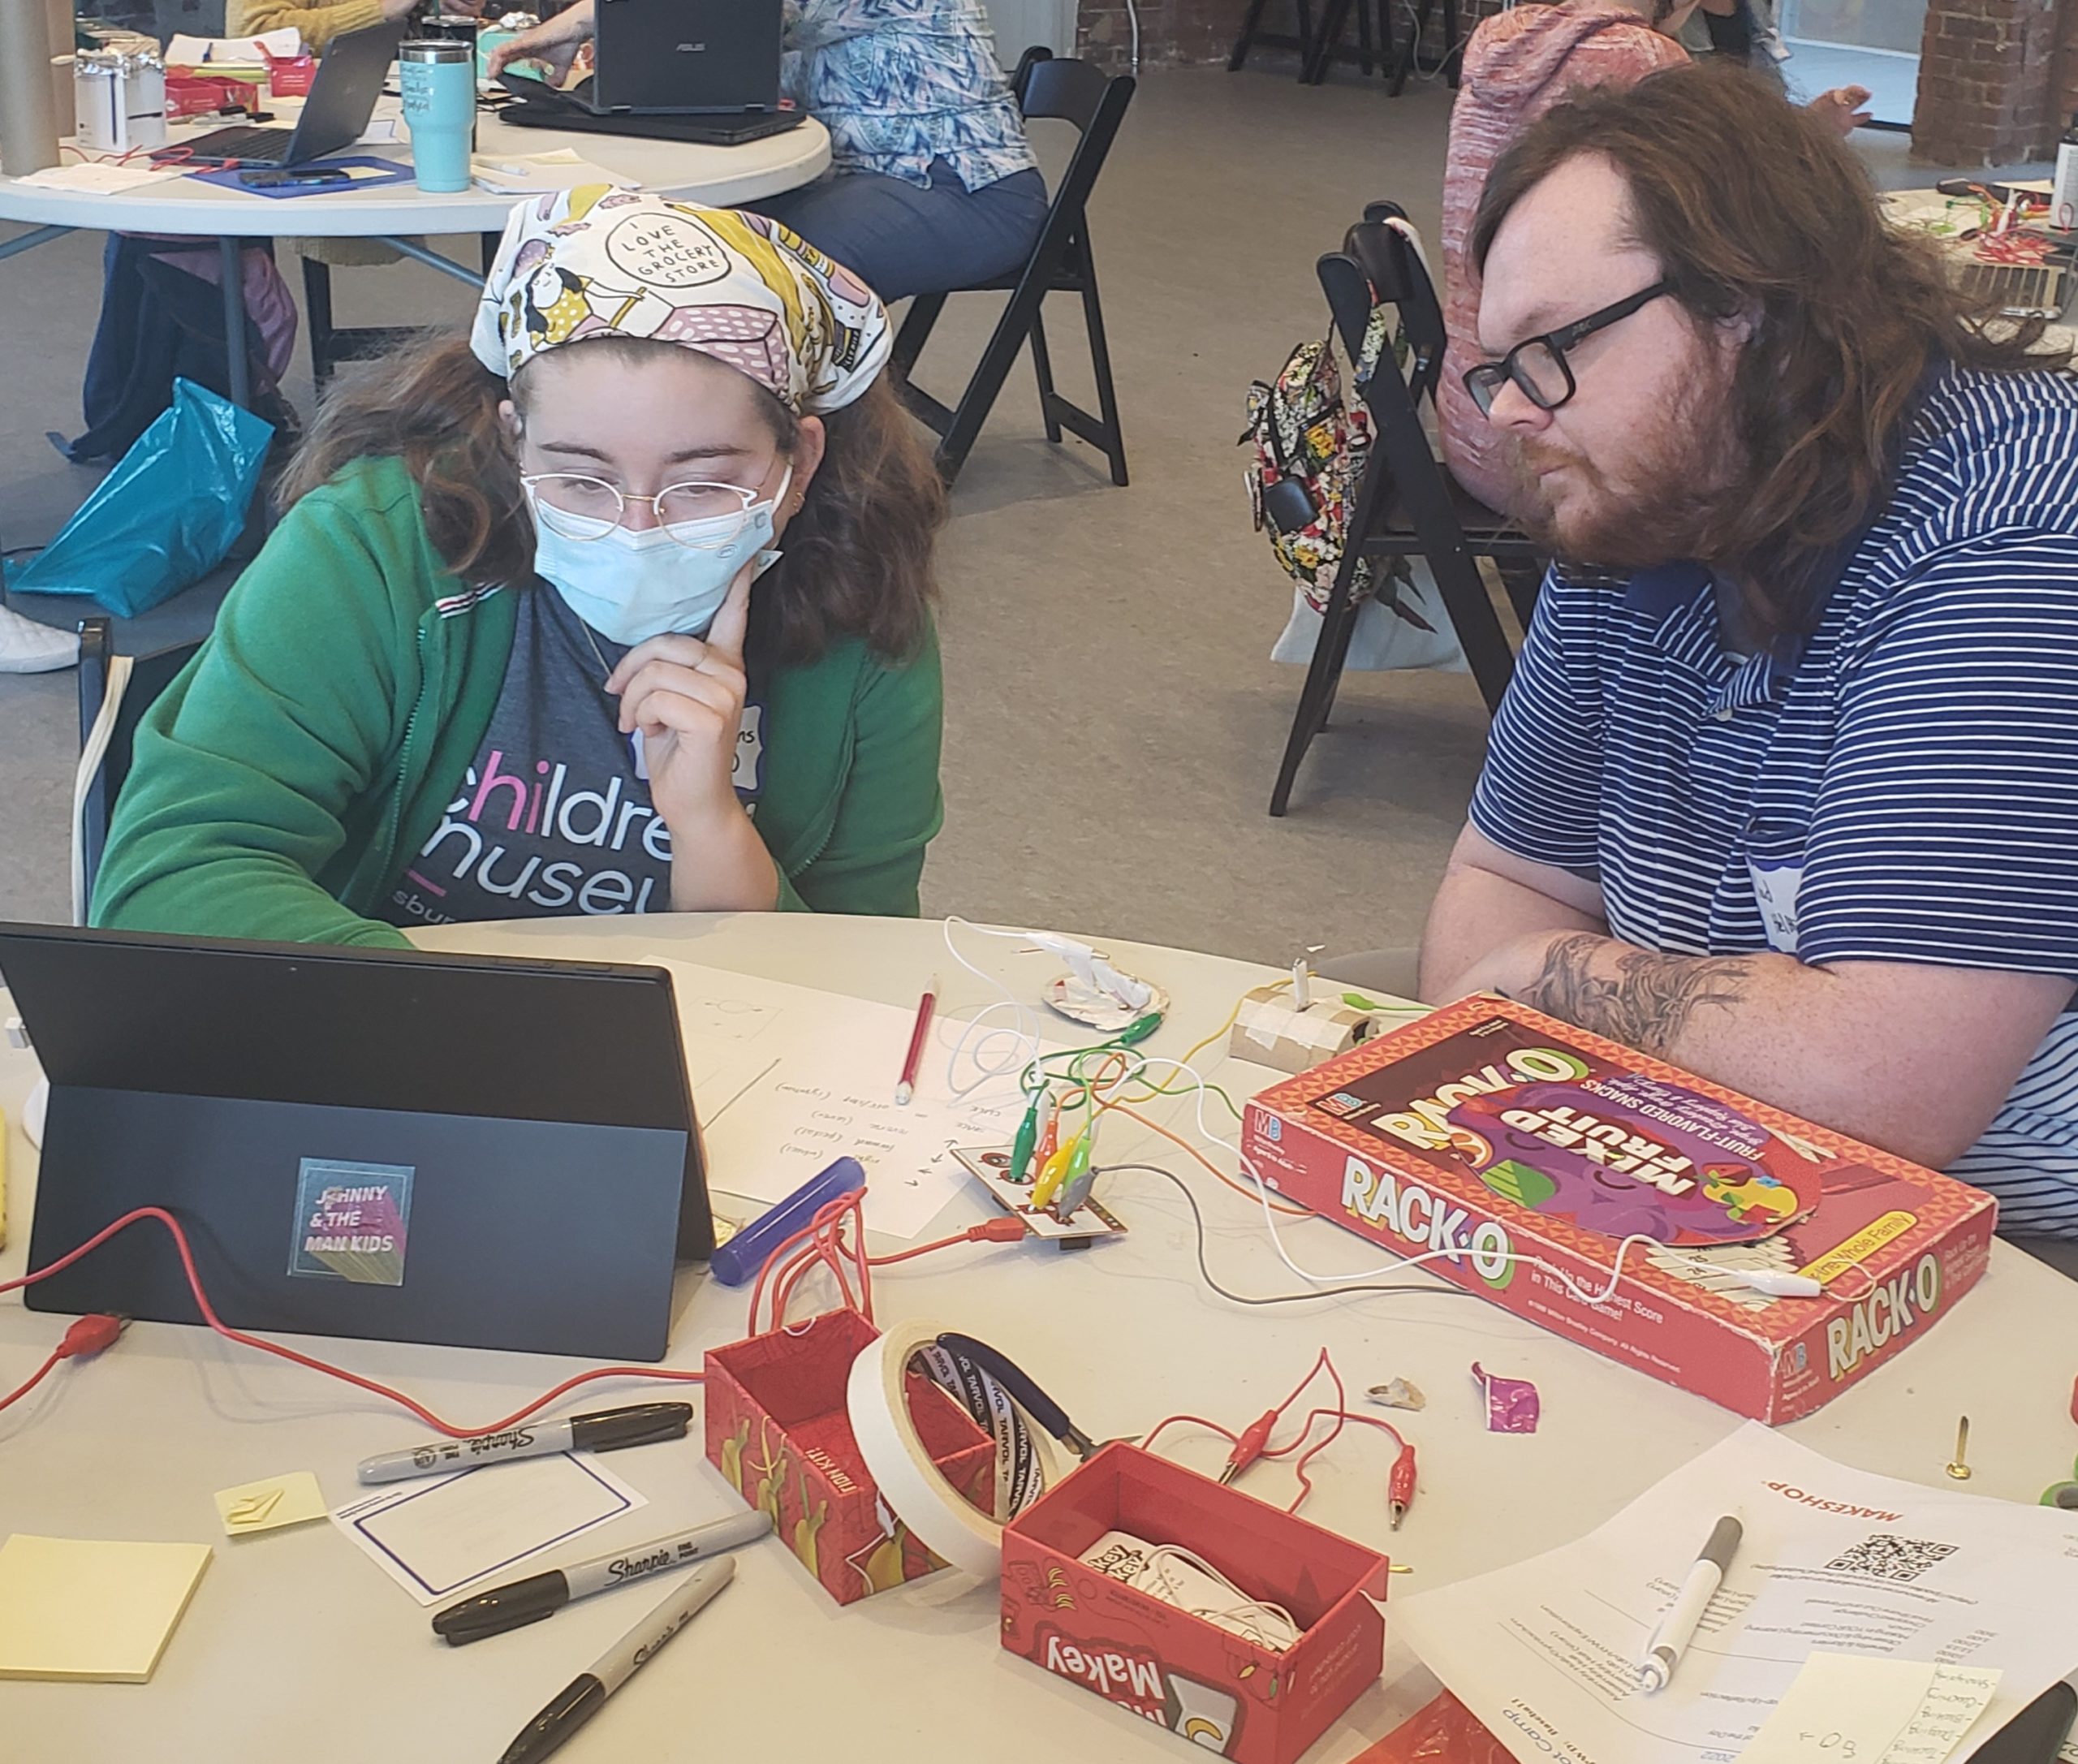 Two adults sit at a table looking intently at a laptop computer that is connected to a Makey Makey kit.